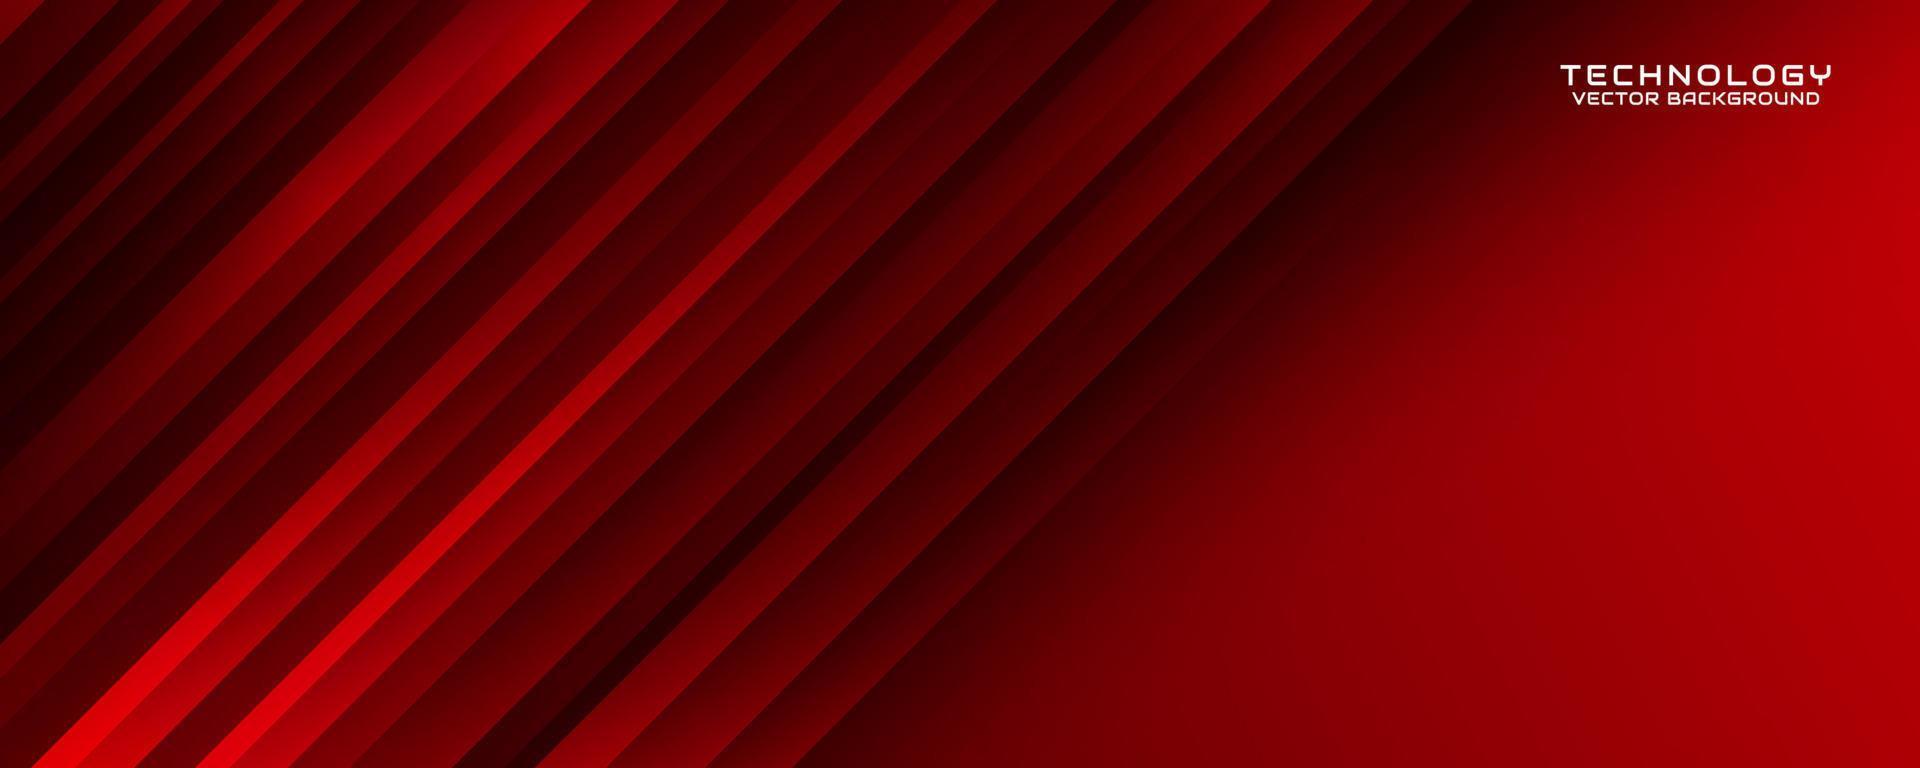 3D red technology abstract background overlap layer on dark space with cutout effect decoration. Graphic design element slash style concept for banner, flyer, card, brochure cover, or landing page vector